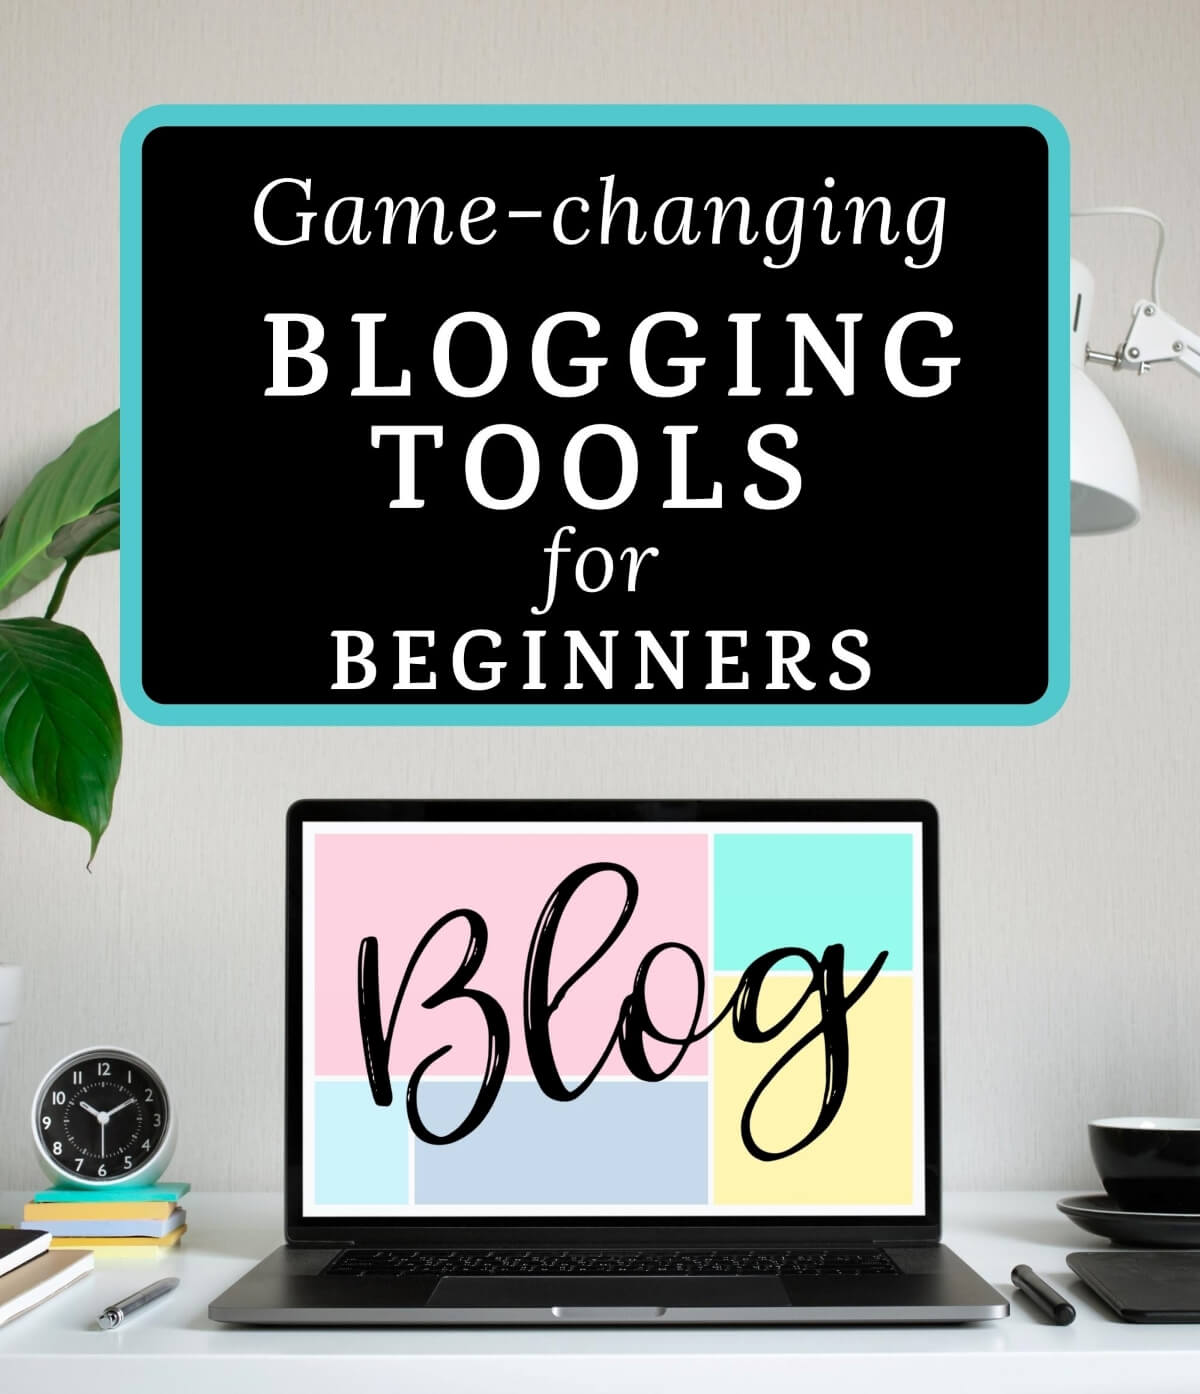 A laptop with the word "blog" on it and "game changing blogging tools for beginners" on top.